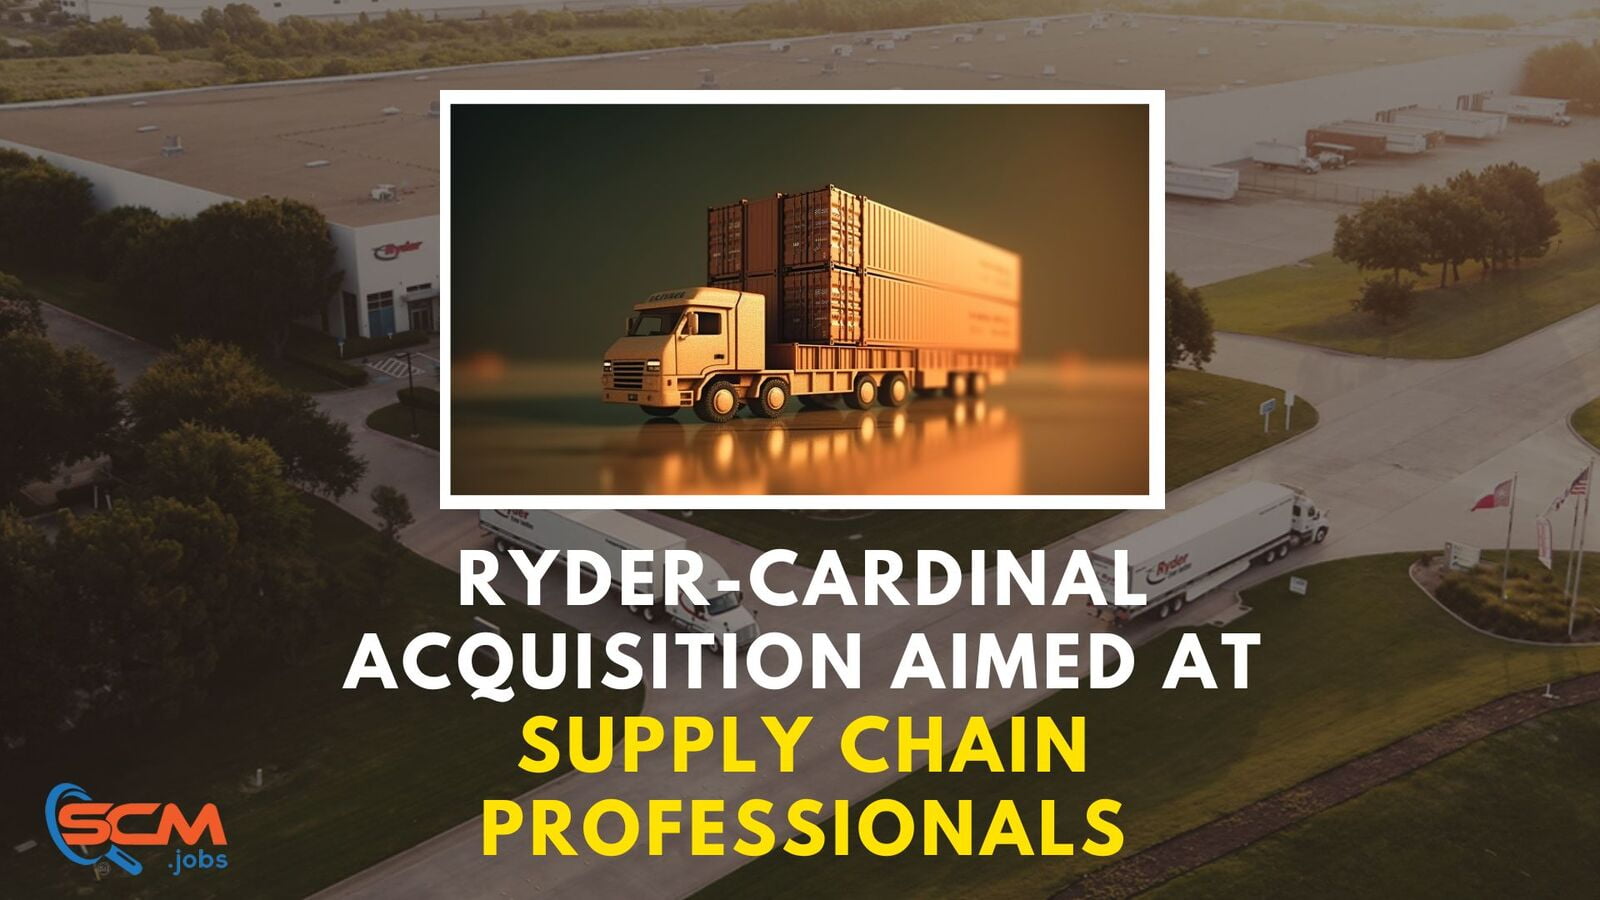 Ryder-Cardinal acquisition aimed at Supply Chain Professionals